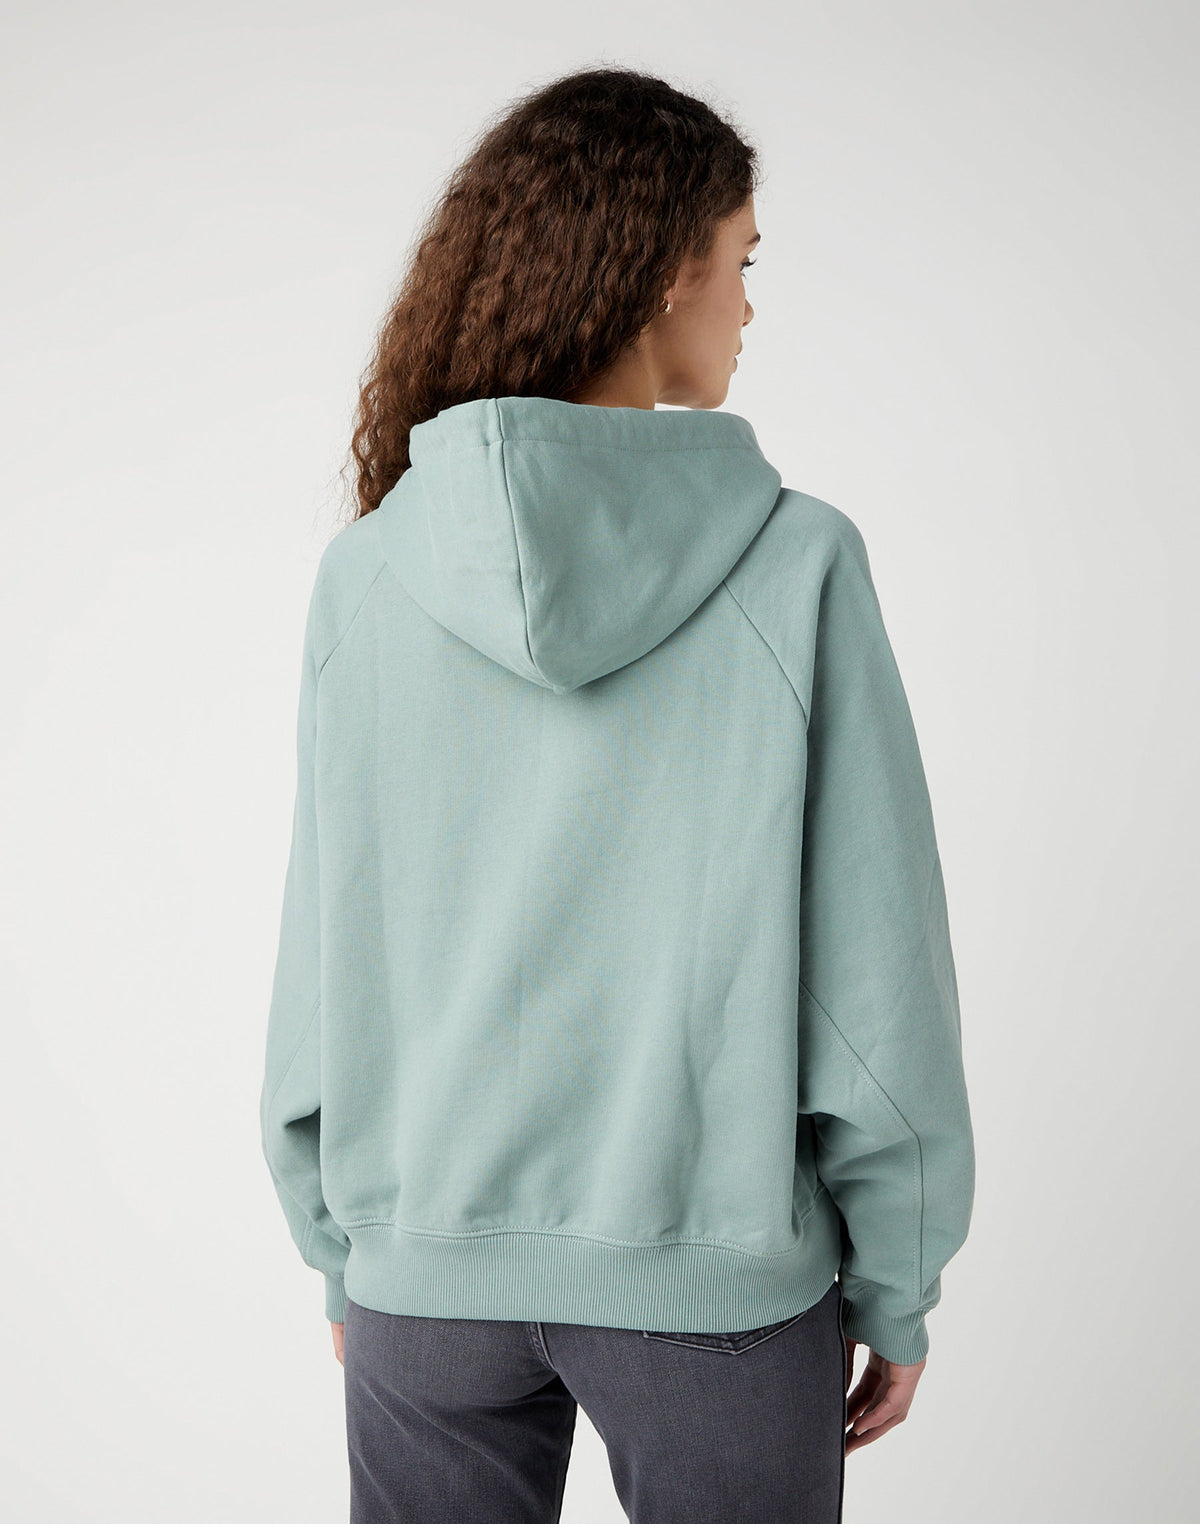 Relaxed Hoodie in Light Matcha